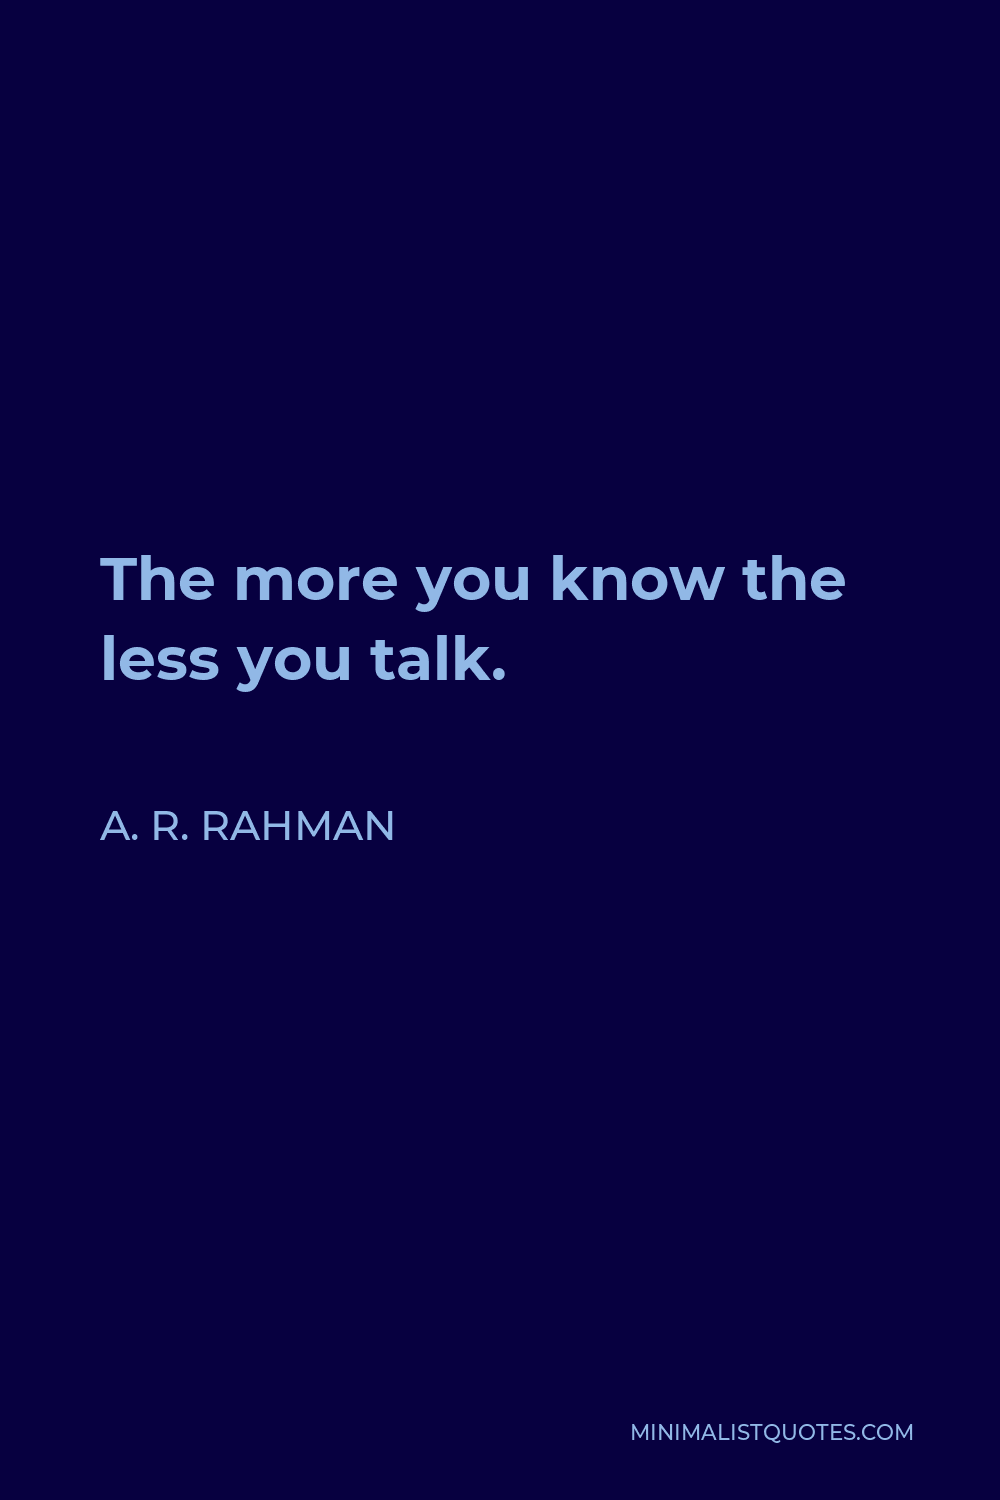 A. R. Rahman Quote - The more you know the less you talk.